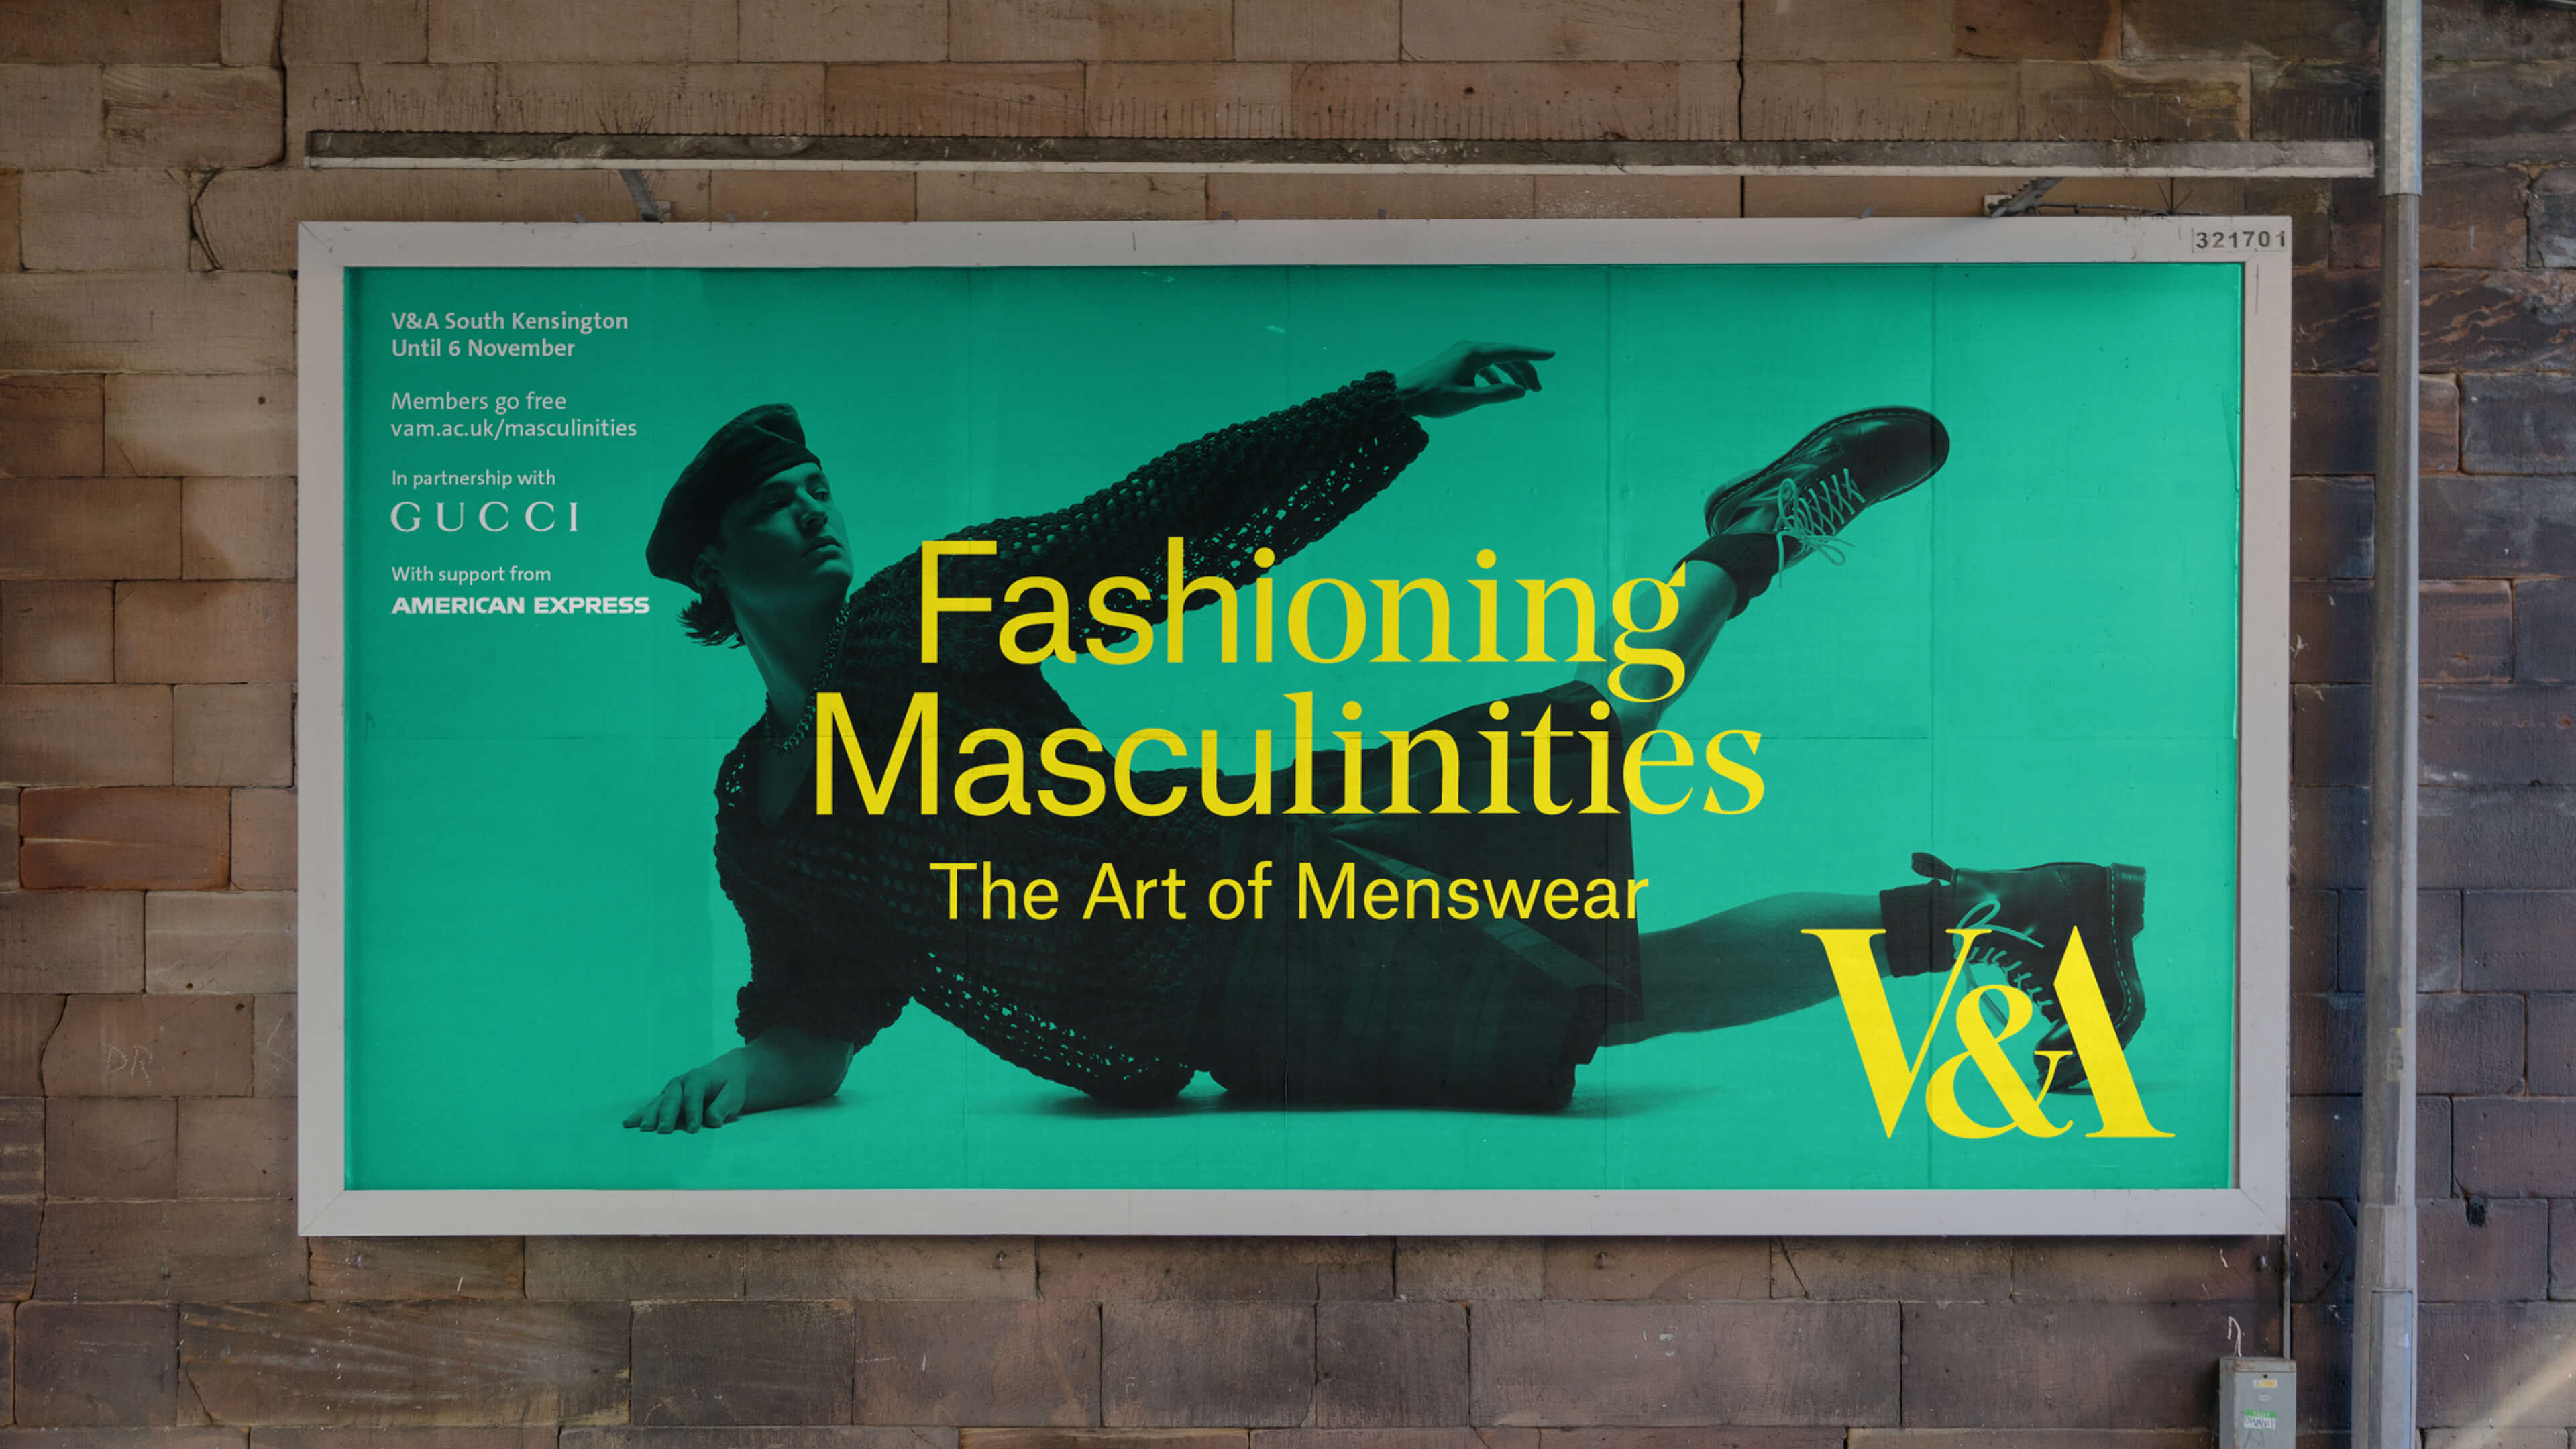 Fashioning Masculinities: The Art of Menswear at the V&A